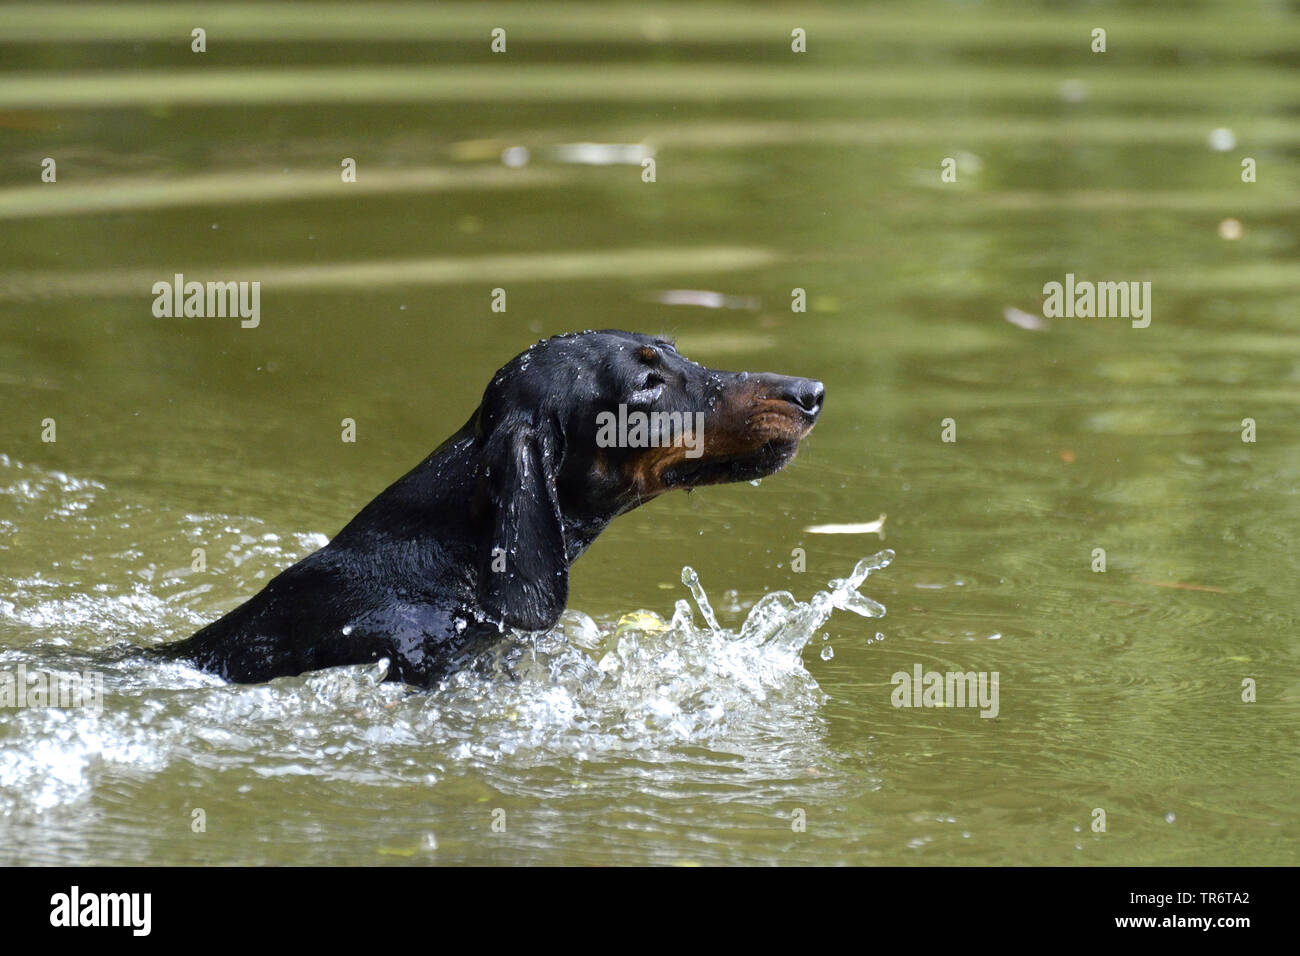 Short-haired Dachshund, Short-haired sausage dog, domestic dog (Canis lupus f. familiaris), jumping into water and swimming, Germany Stock Photo